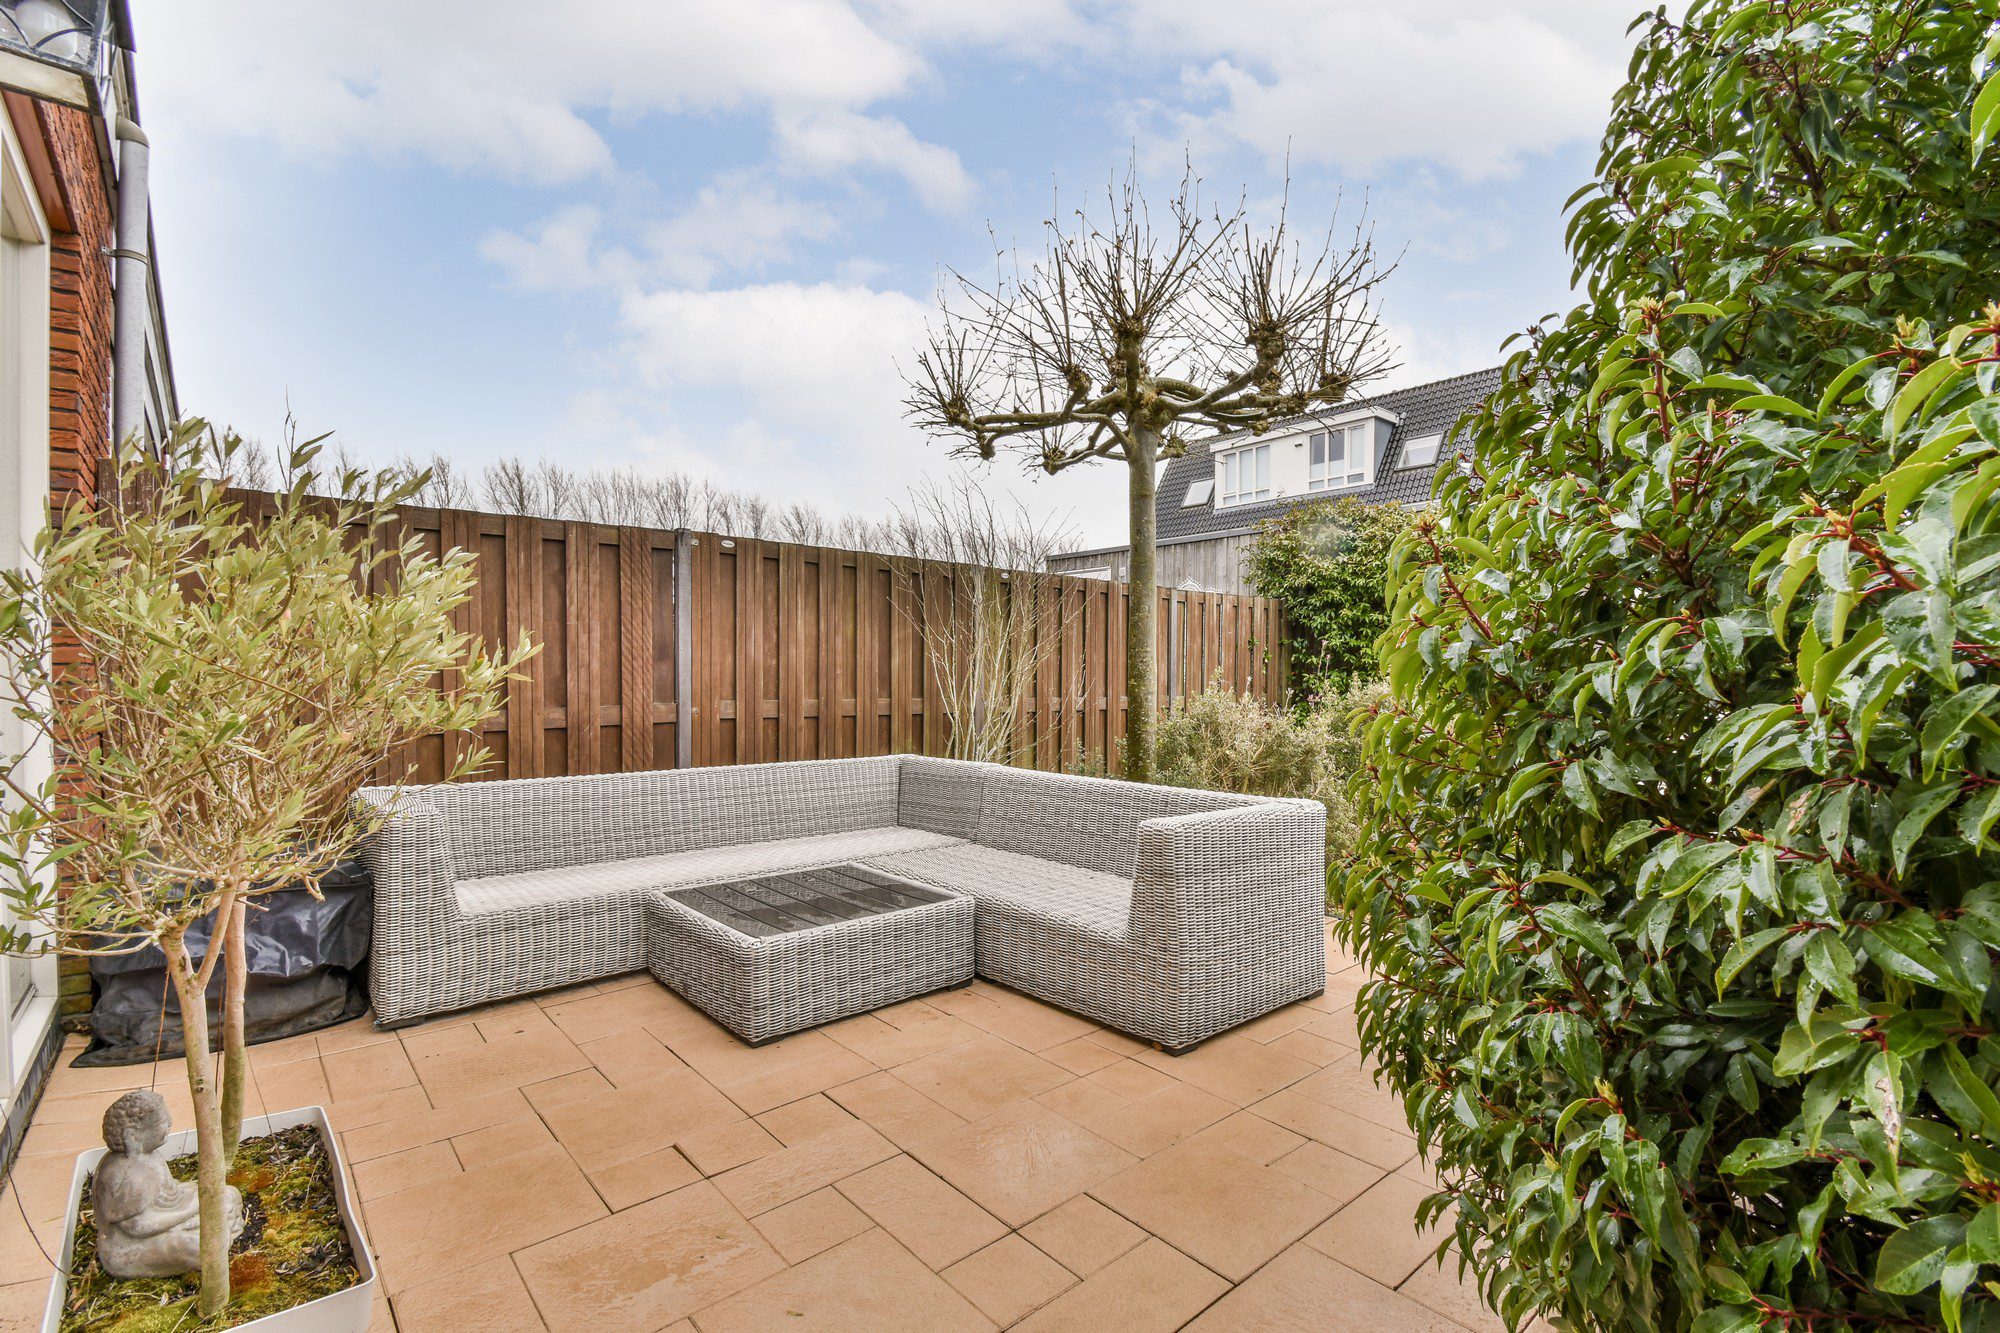 The image shows a neatly maintained outdoor patio area. There is a modern wicker furniture set comprising of a corner sofa and a square coffee table placed on tiled flooring. A young olive tree is potted and stands slightly to the left in the image, with a small stone buddha statue at its base. To the right, there is a thick, leafy green shrub. In the background, there's a wooden fence that provides privacy and some deciduous trees without leaves, which might suggest that the season is either autumn or winter. There are houses visible in the distance, indicating this patio is part of a residential area. The sky is mostly cloudy, implying an overcast weather condition.